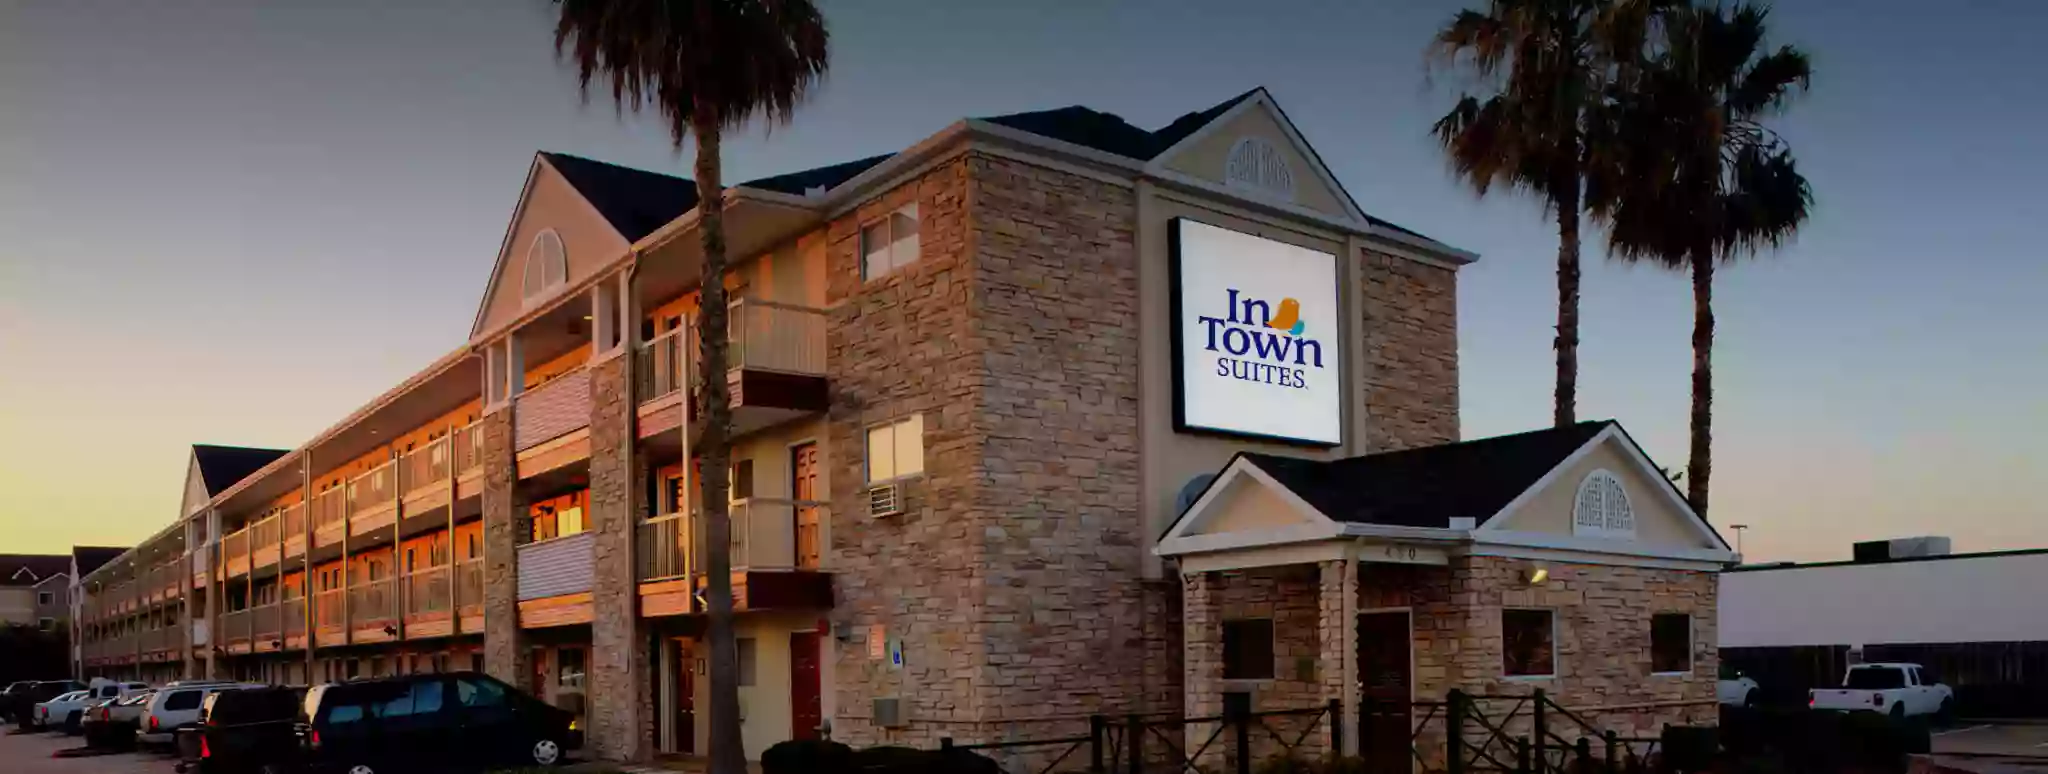 InTown Suites Extended Stay Minneapolis MN - Burnsville